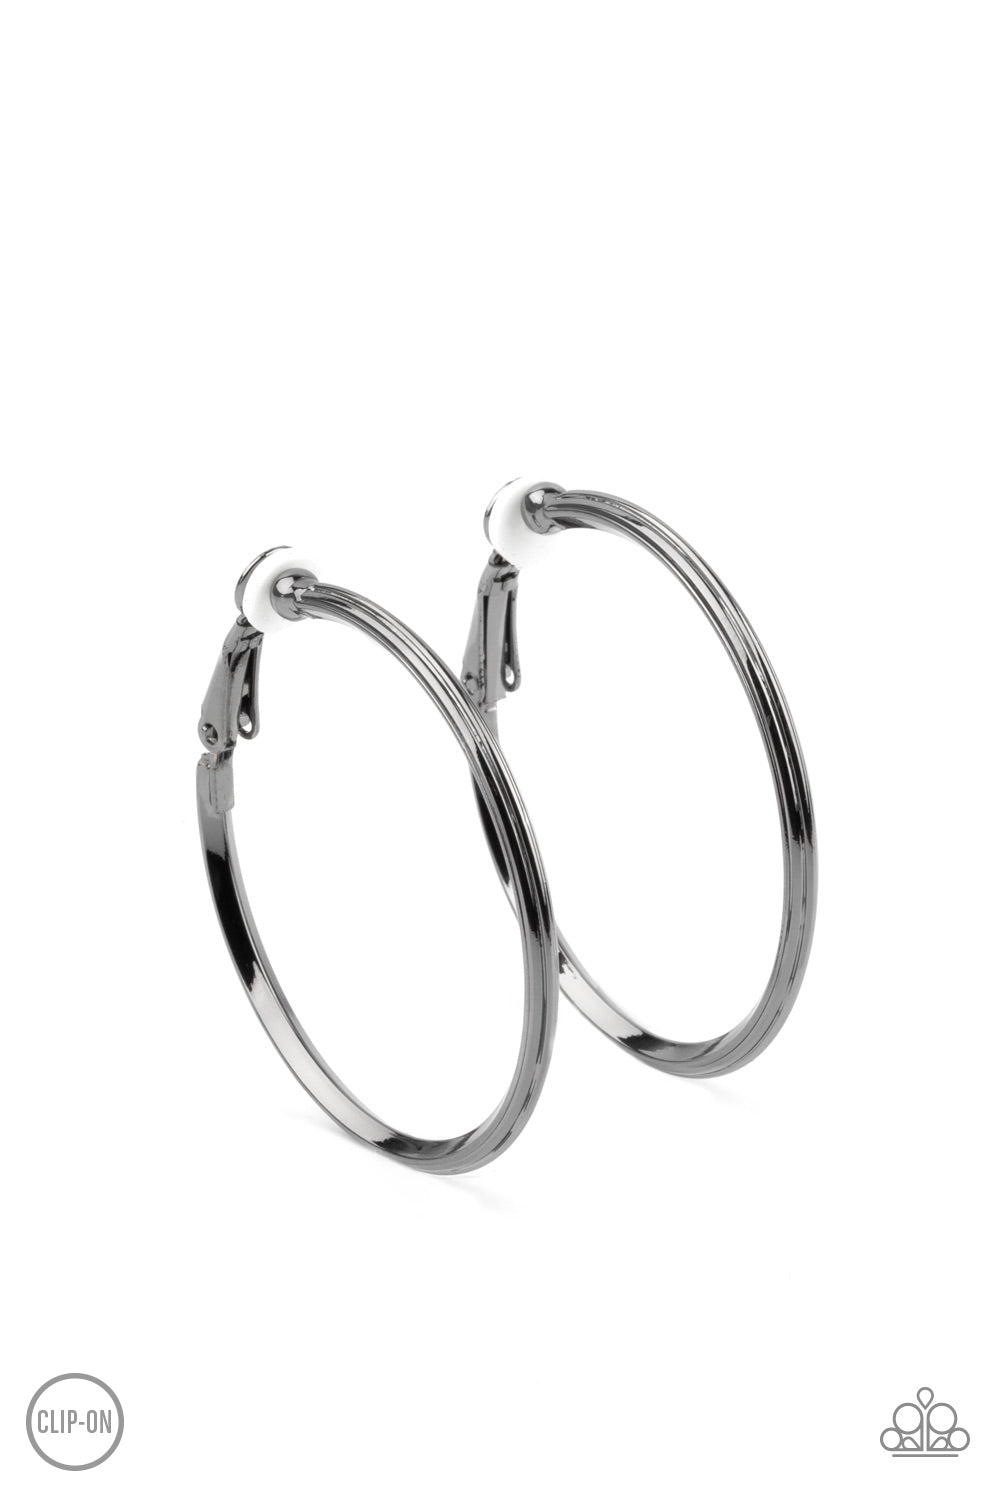 City Classic - Black Clip-On Hoop Earrings etched in fine lines, a beveled gunmetal hoop curls around the ear for a classic look. Hoop measures approximately 1 1/2" in diameter. Earring attaches to a standard clip-on fitting.